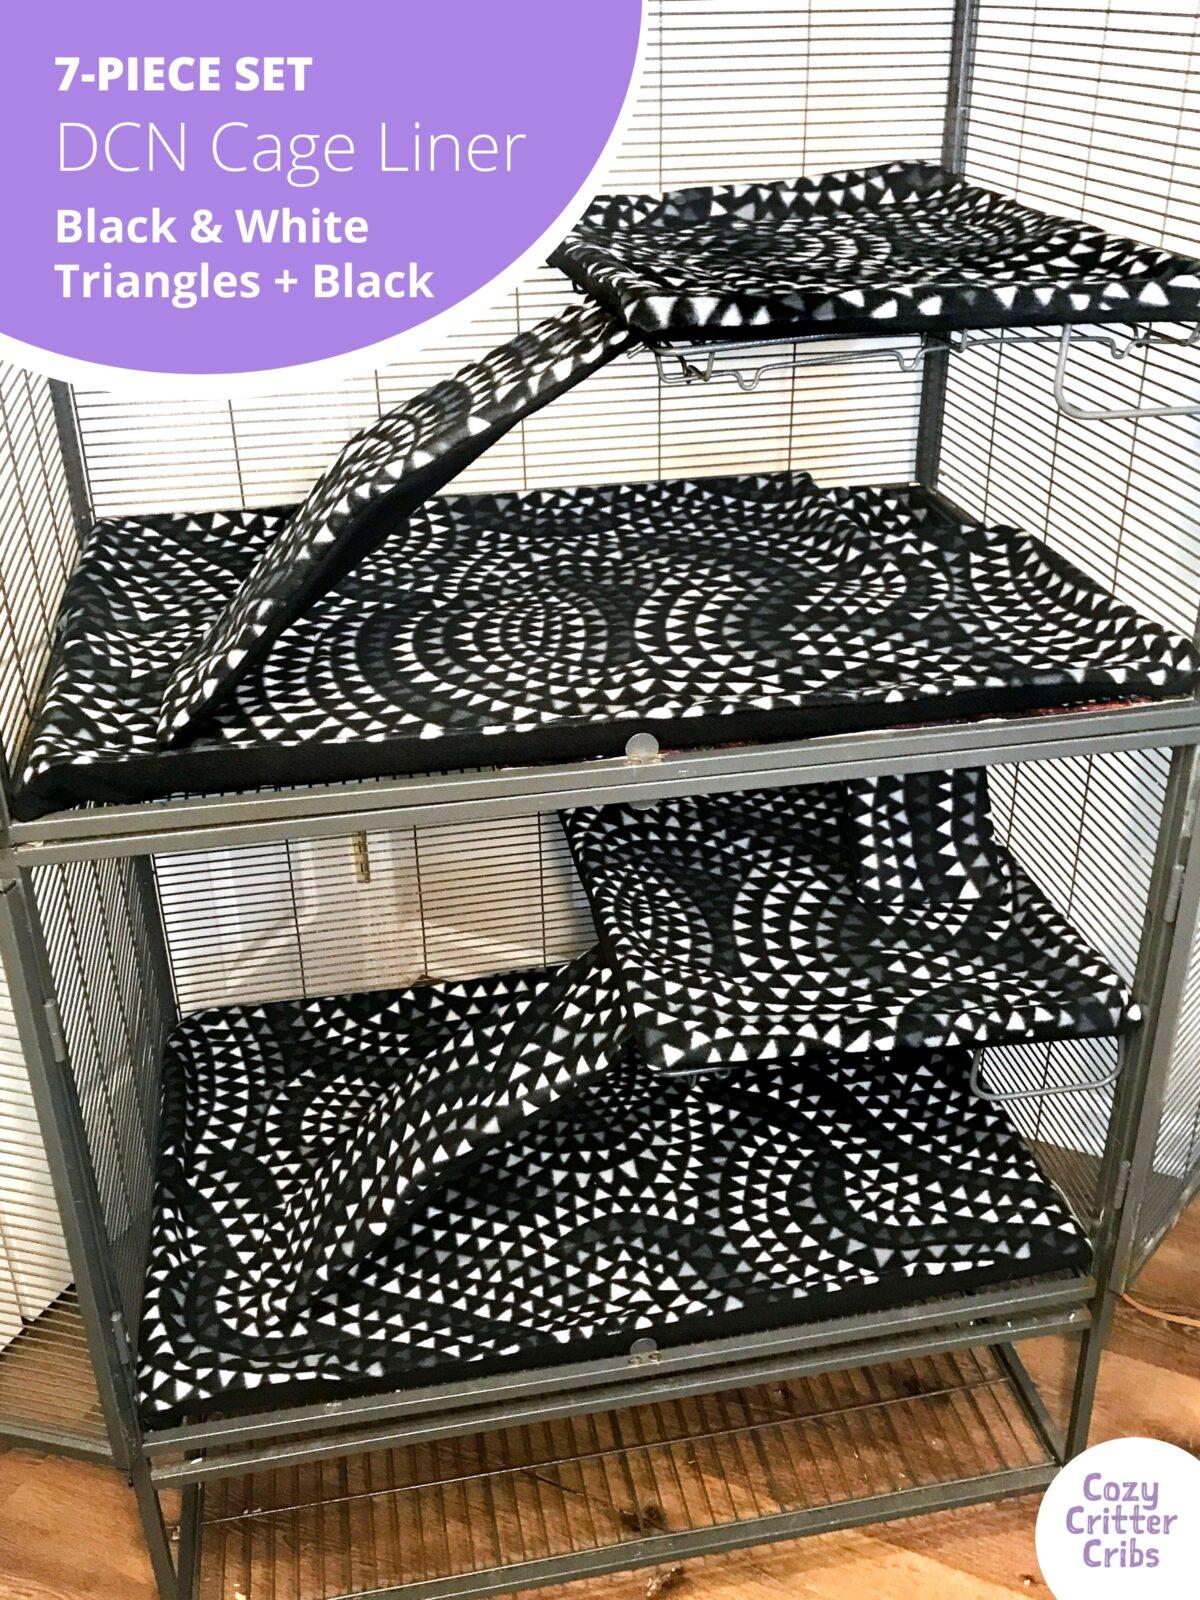 Cage Liner Black & White Triangles Ramp Covers thumbnail